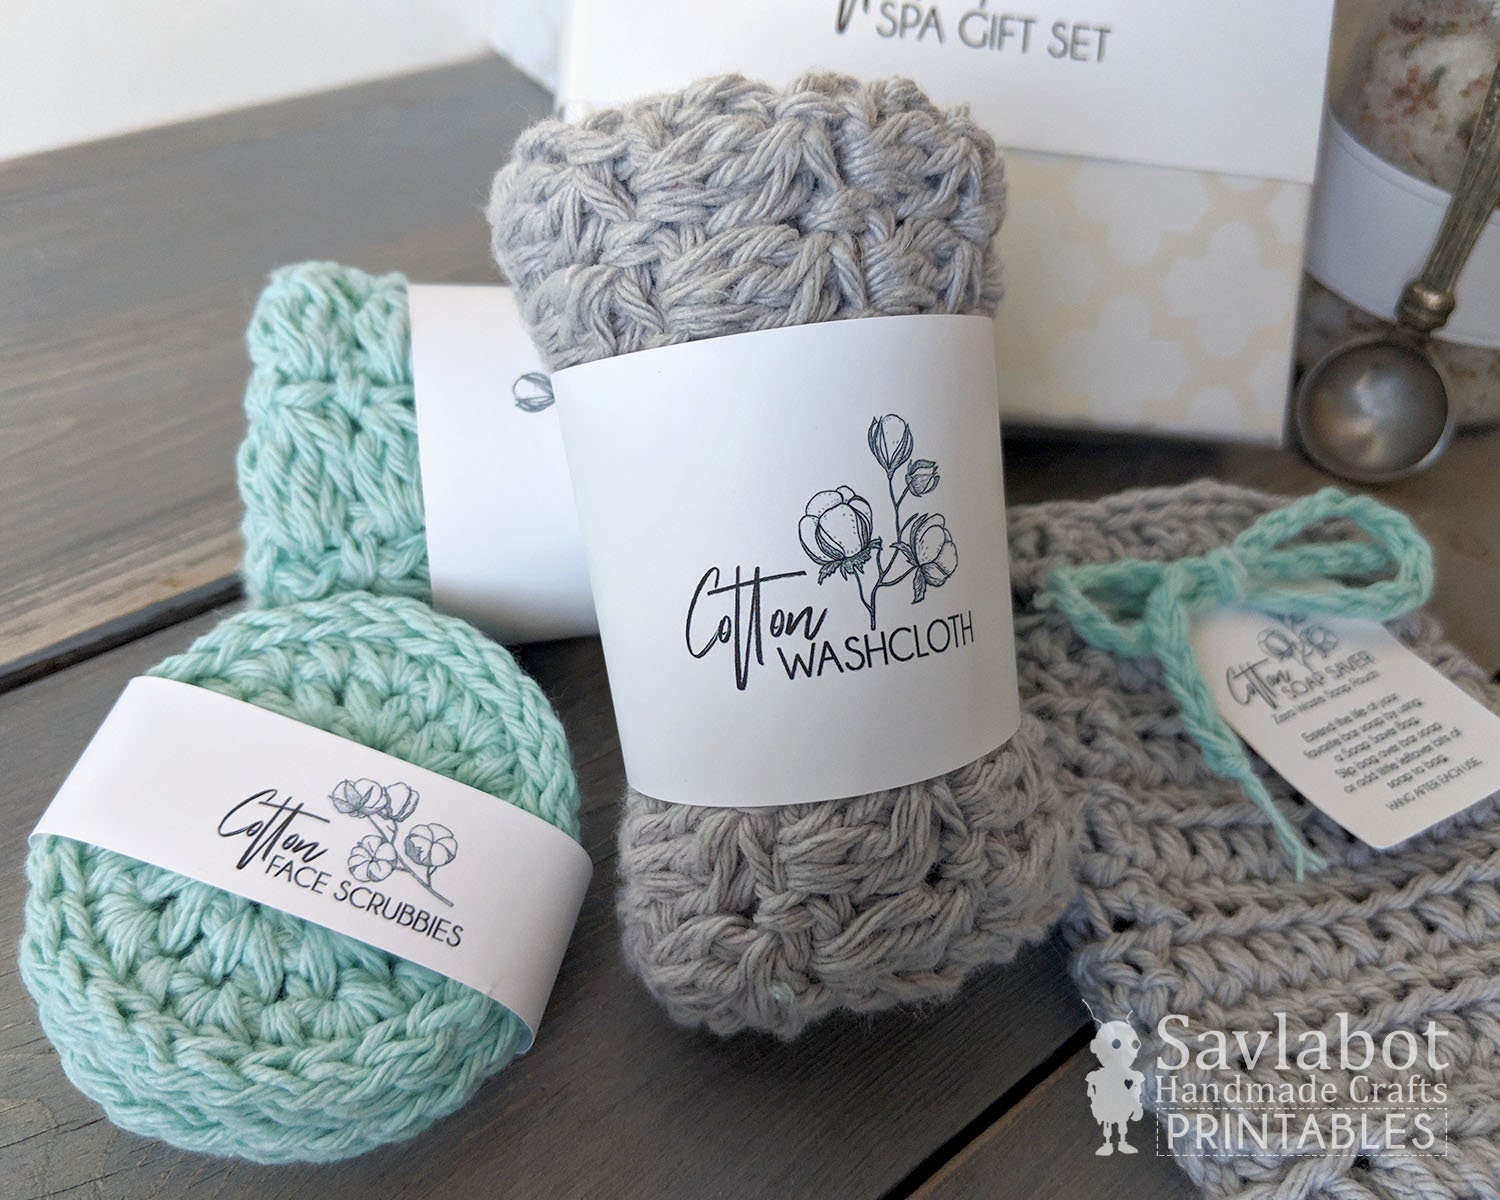 Crochet Tags Labels, Facial Rounds, Washcloth Wrap, Printable Gift